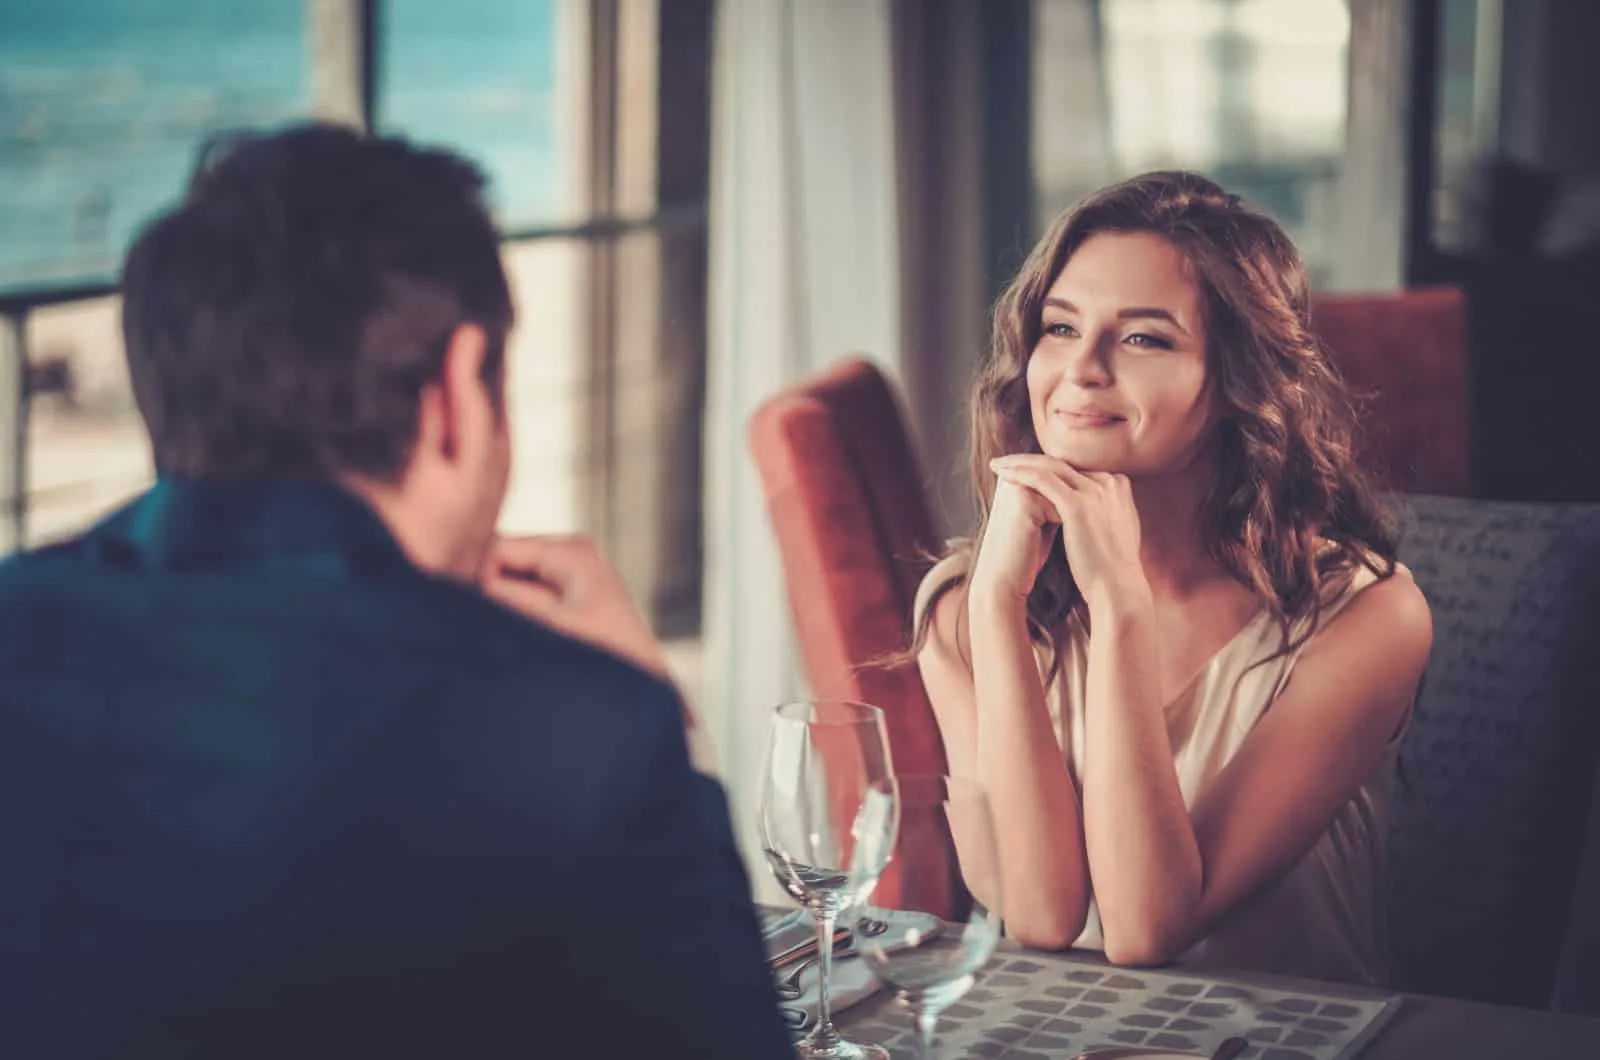 woman smiling warmly at her date